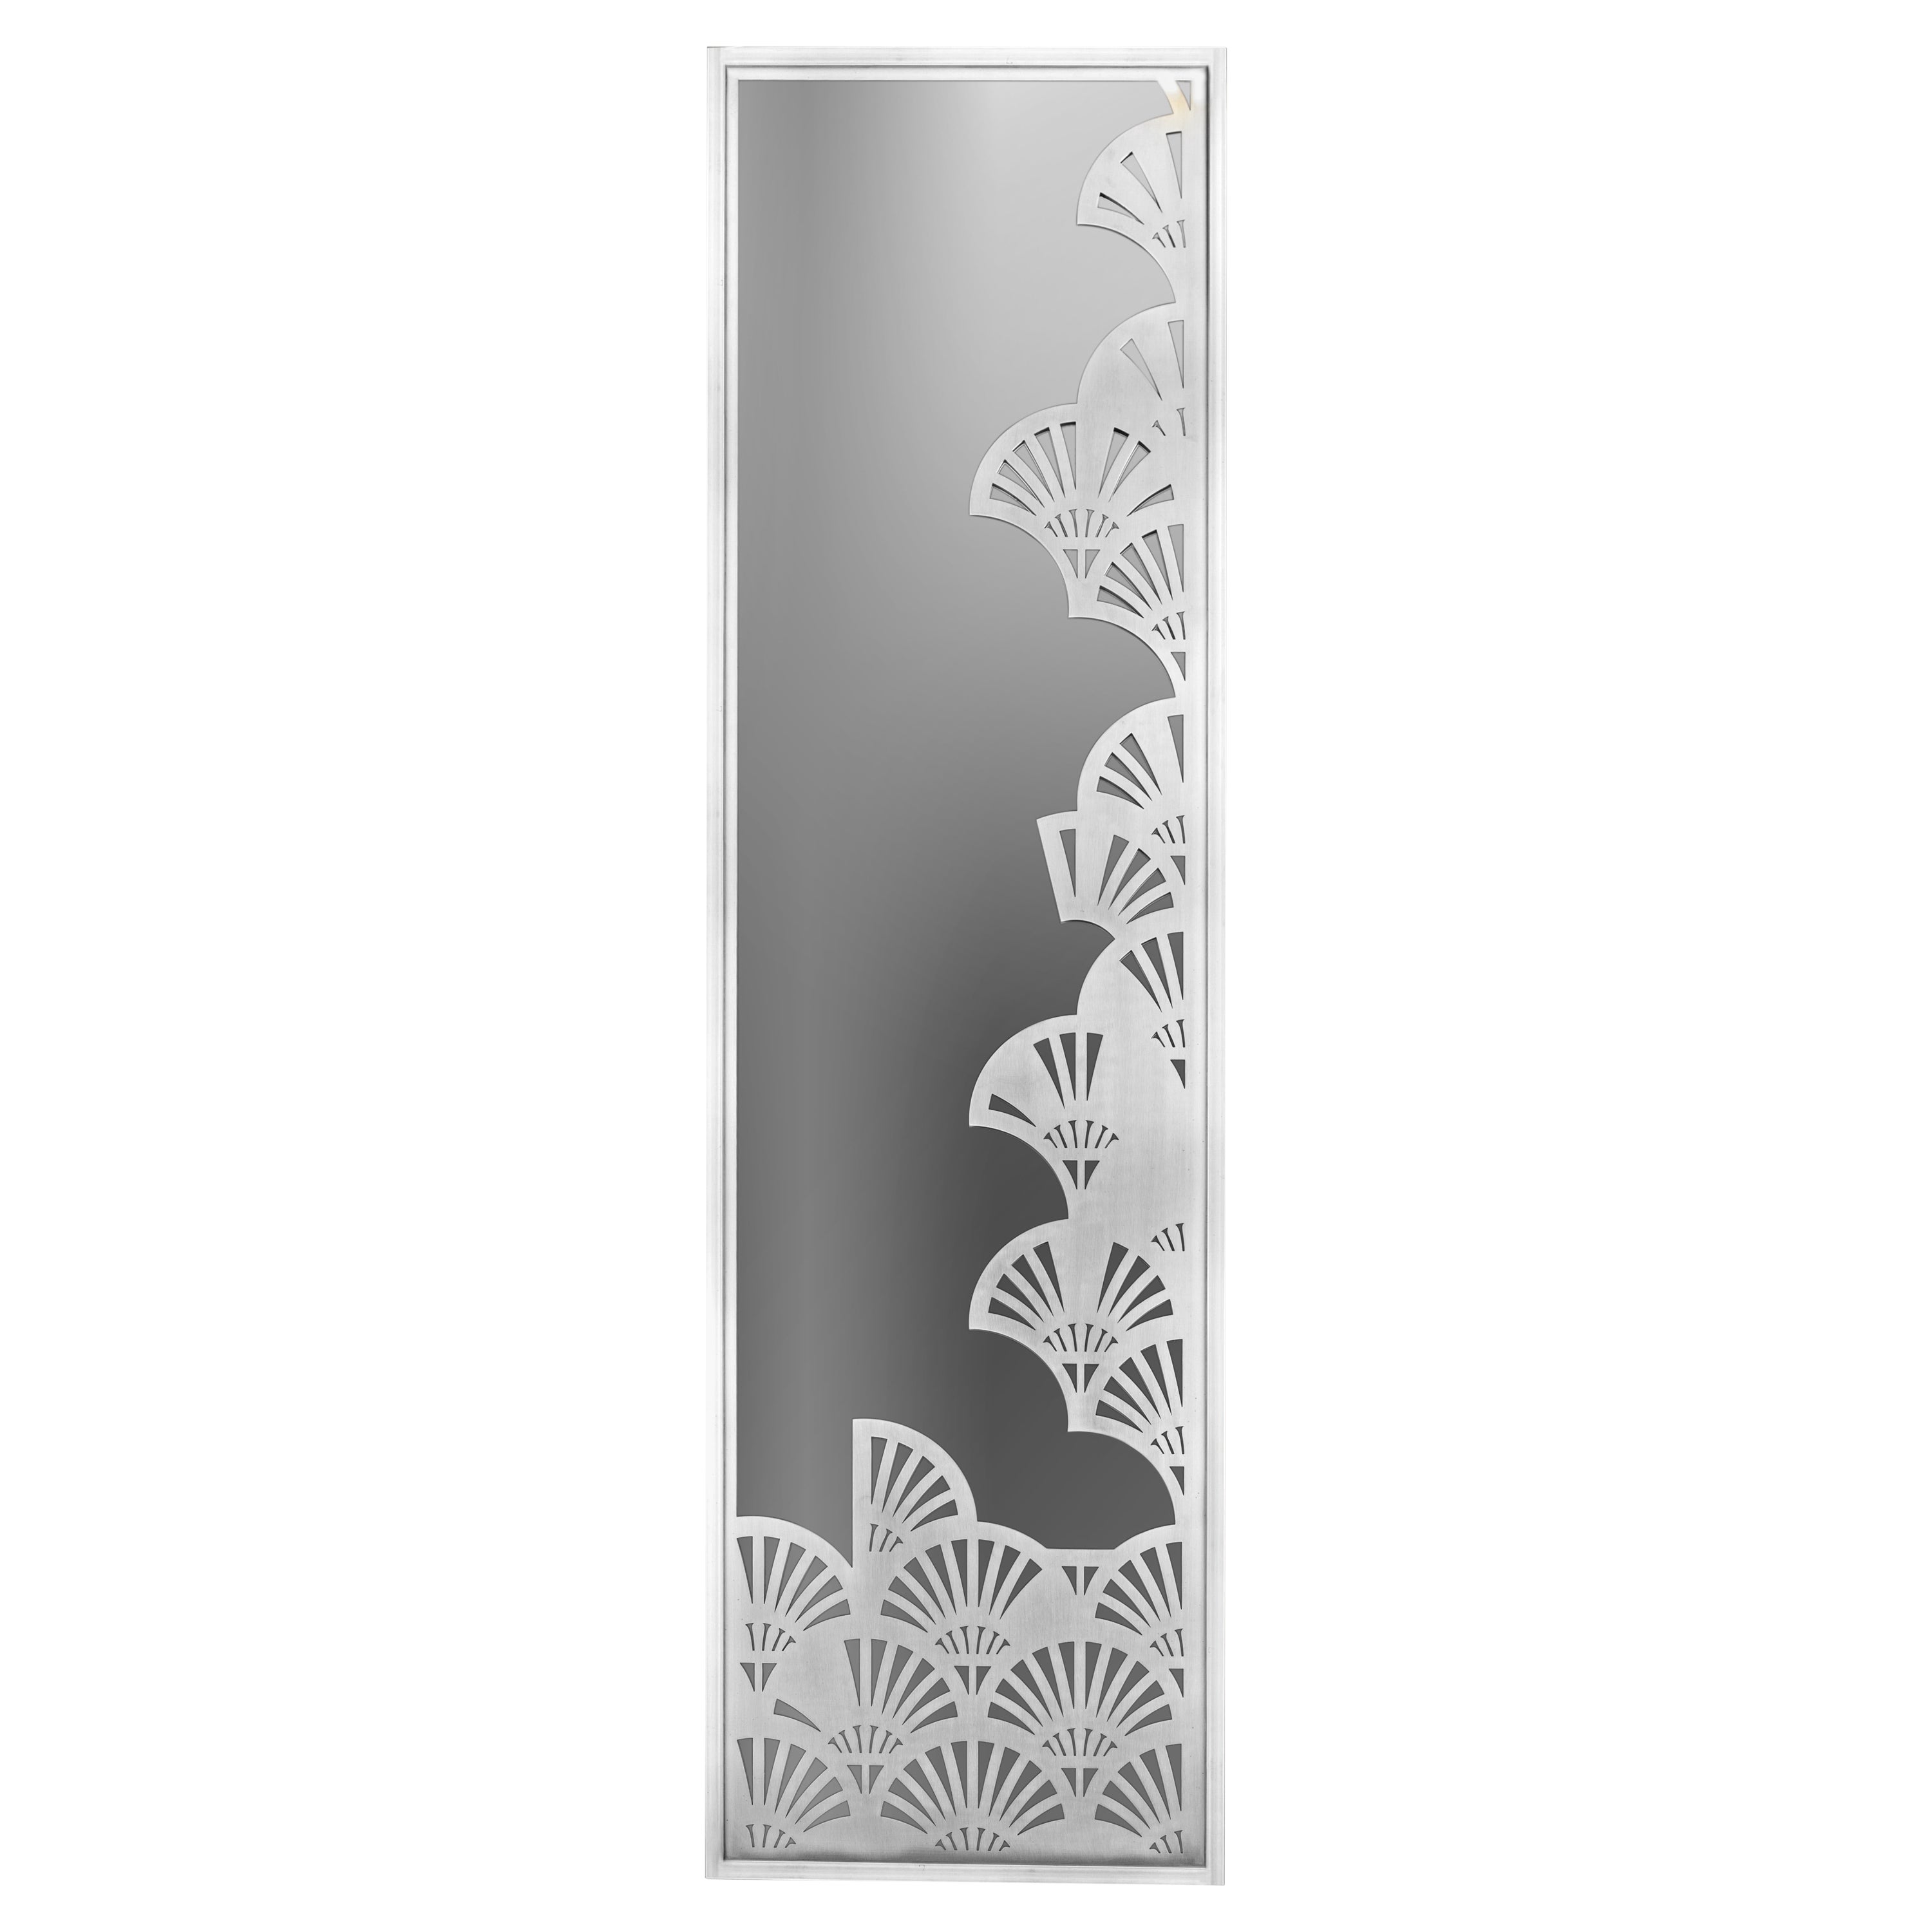 Asymmetric Lotus Pattern Stainless Steel Mirror Inspired from Ancient Egypt